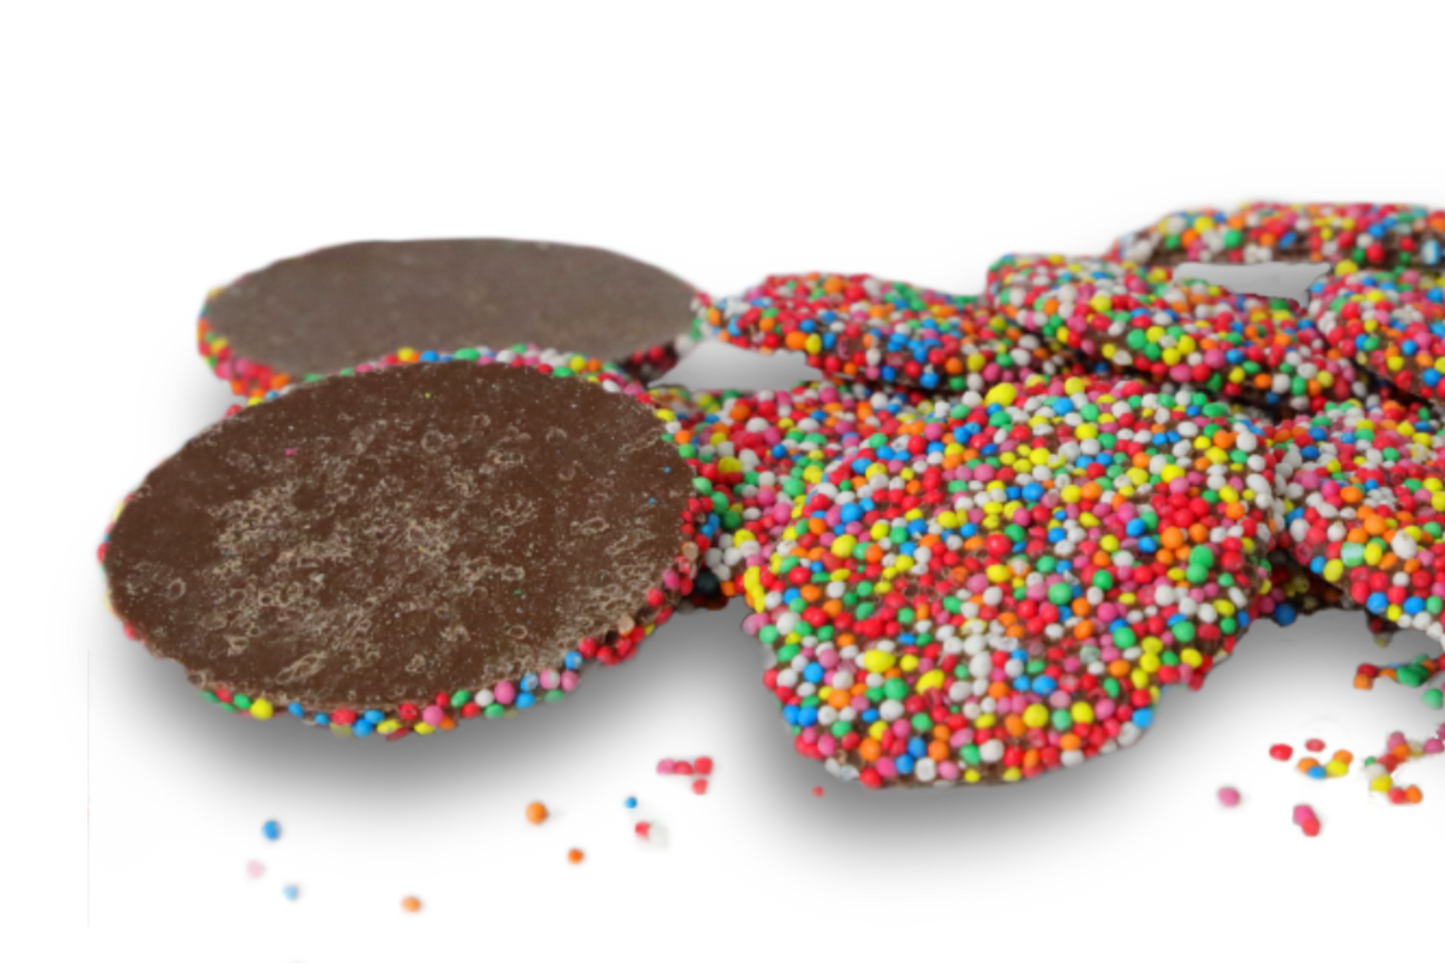 Chocolate Speckles